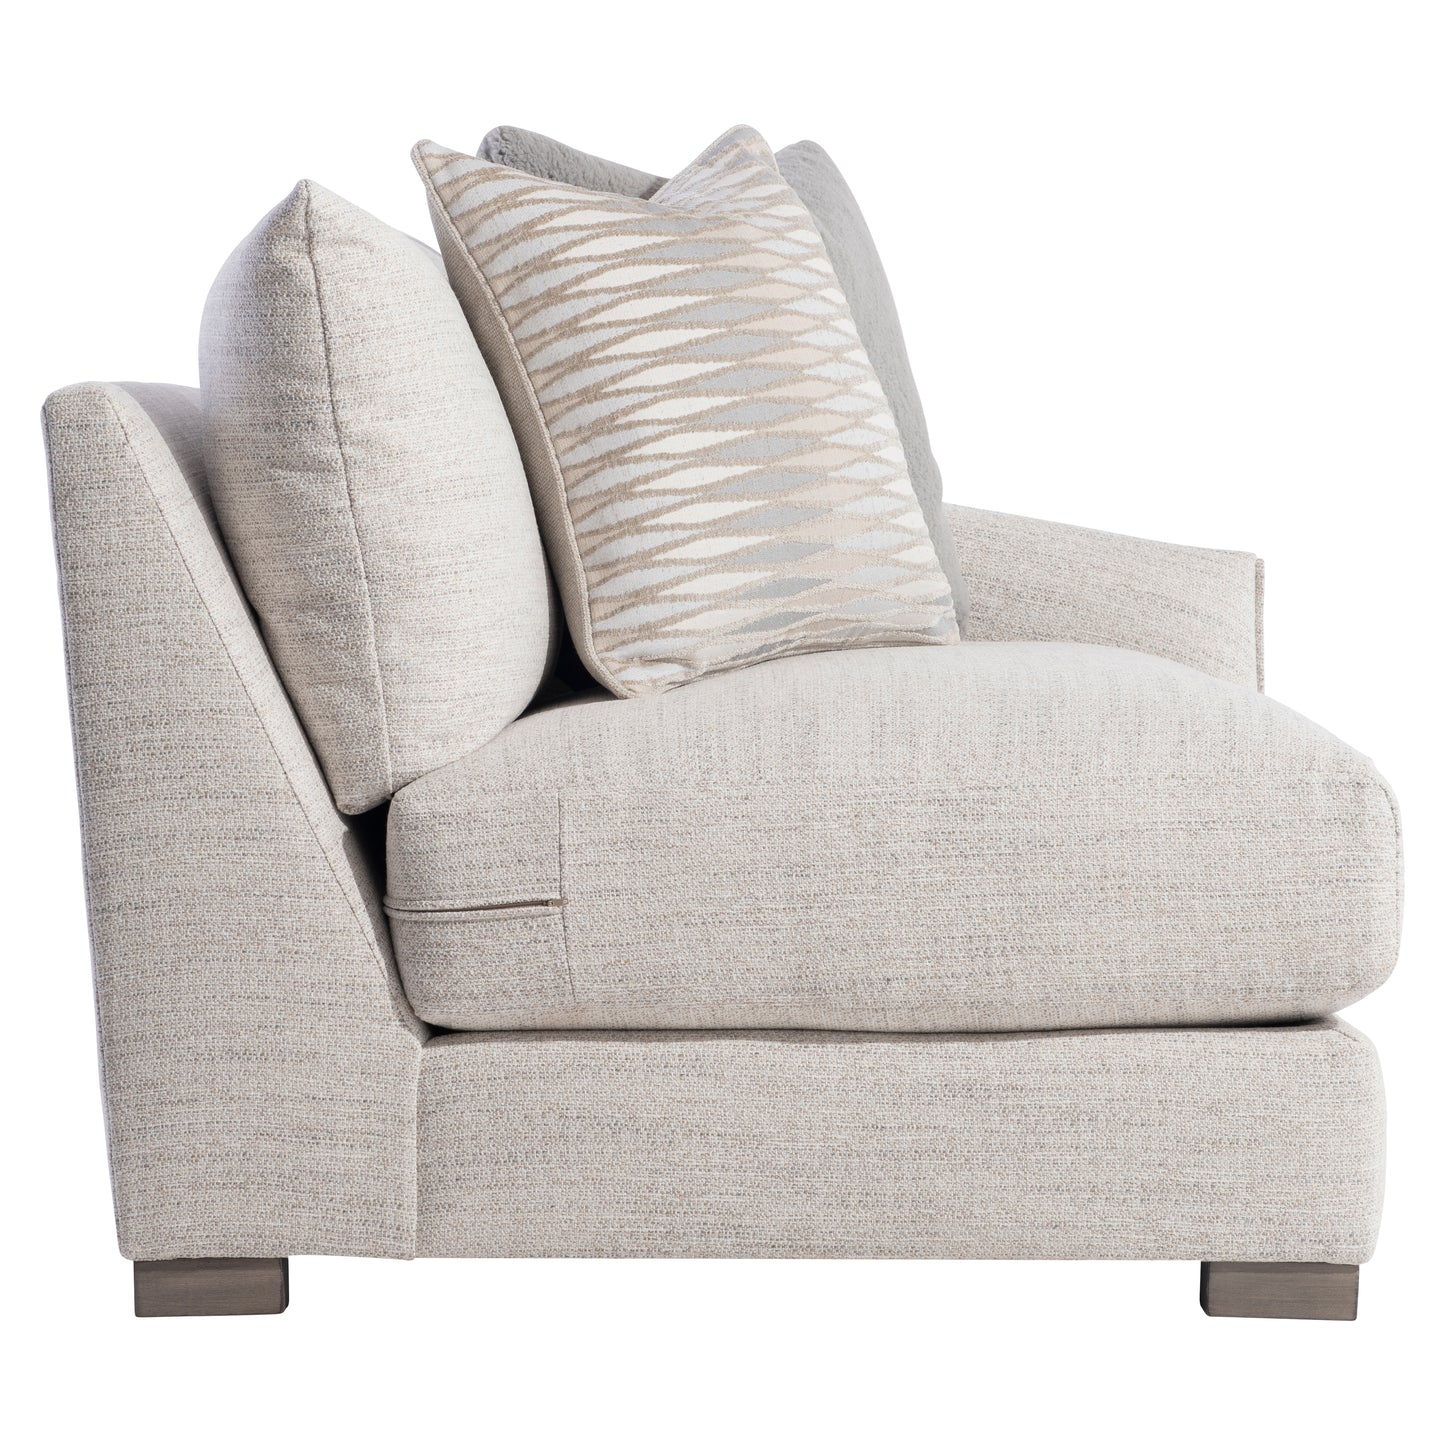 Heavenly Fabric Right Arm Chair